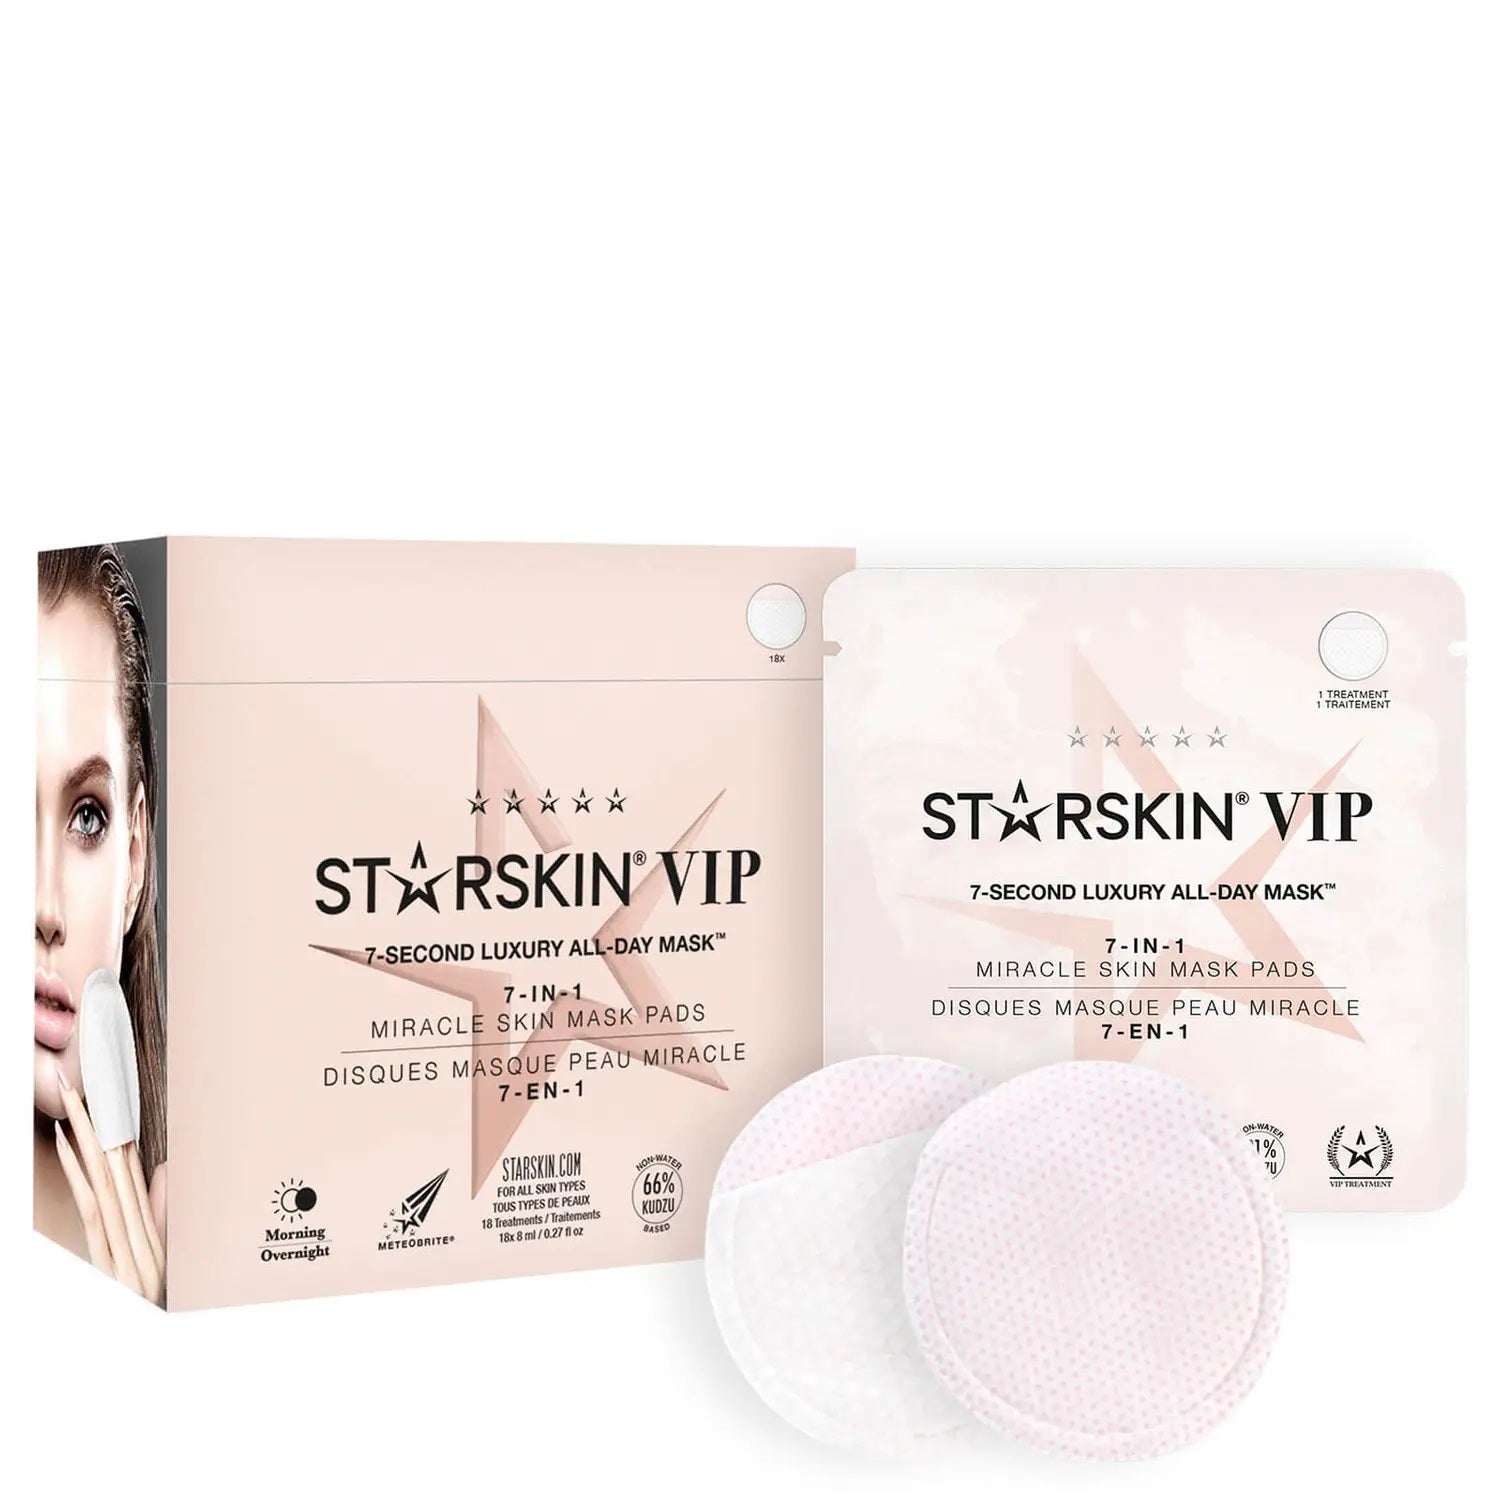 STARSKIN® VIP 7-Second Luxury All-Day Mask 18 Pack,  7-in-1 Miracle Skin Mask Pads Grace Beauty